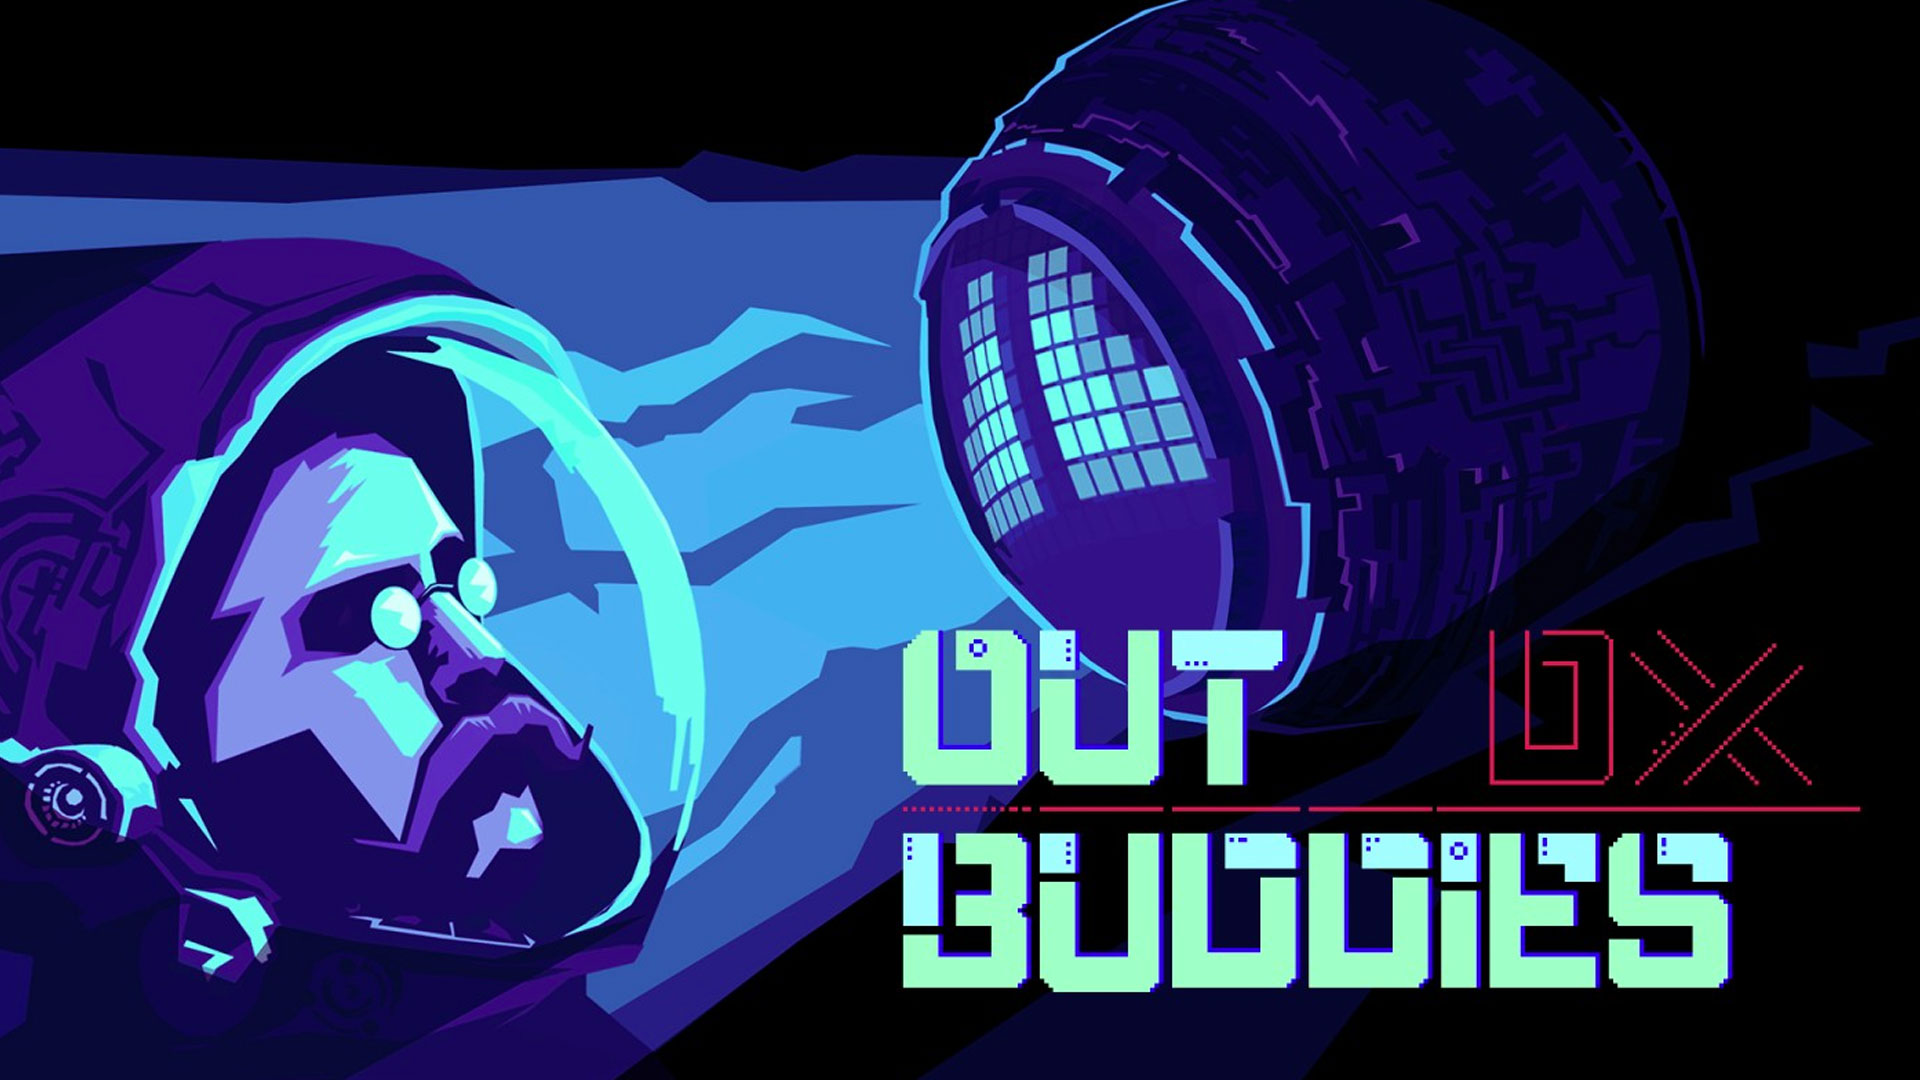 Outbuddies Wallpapers